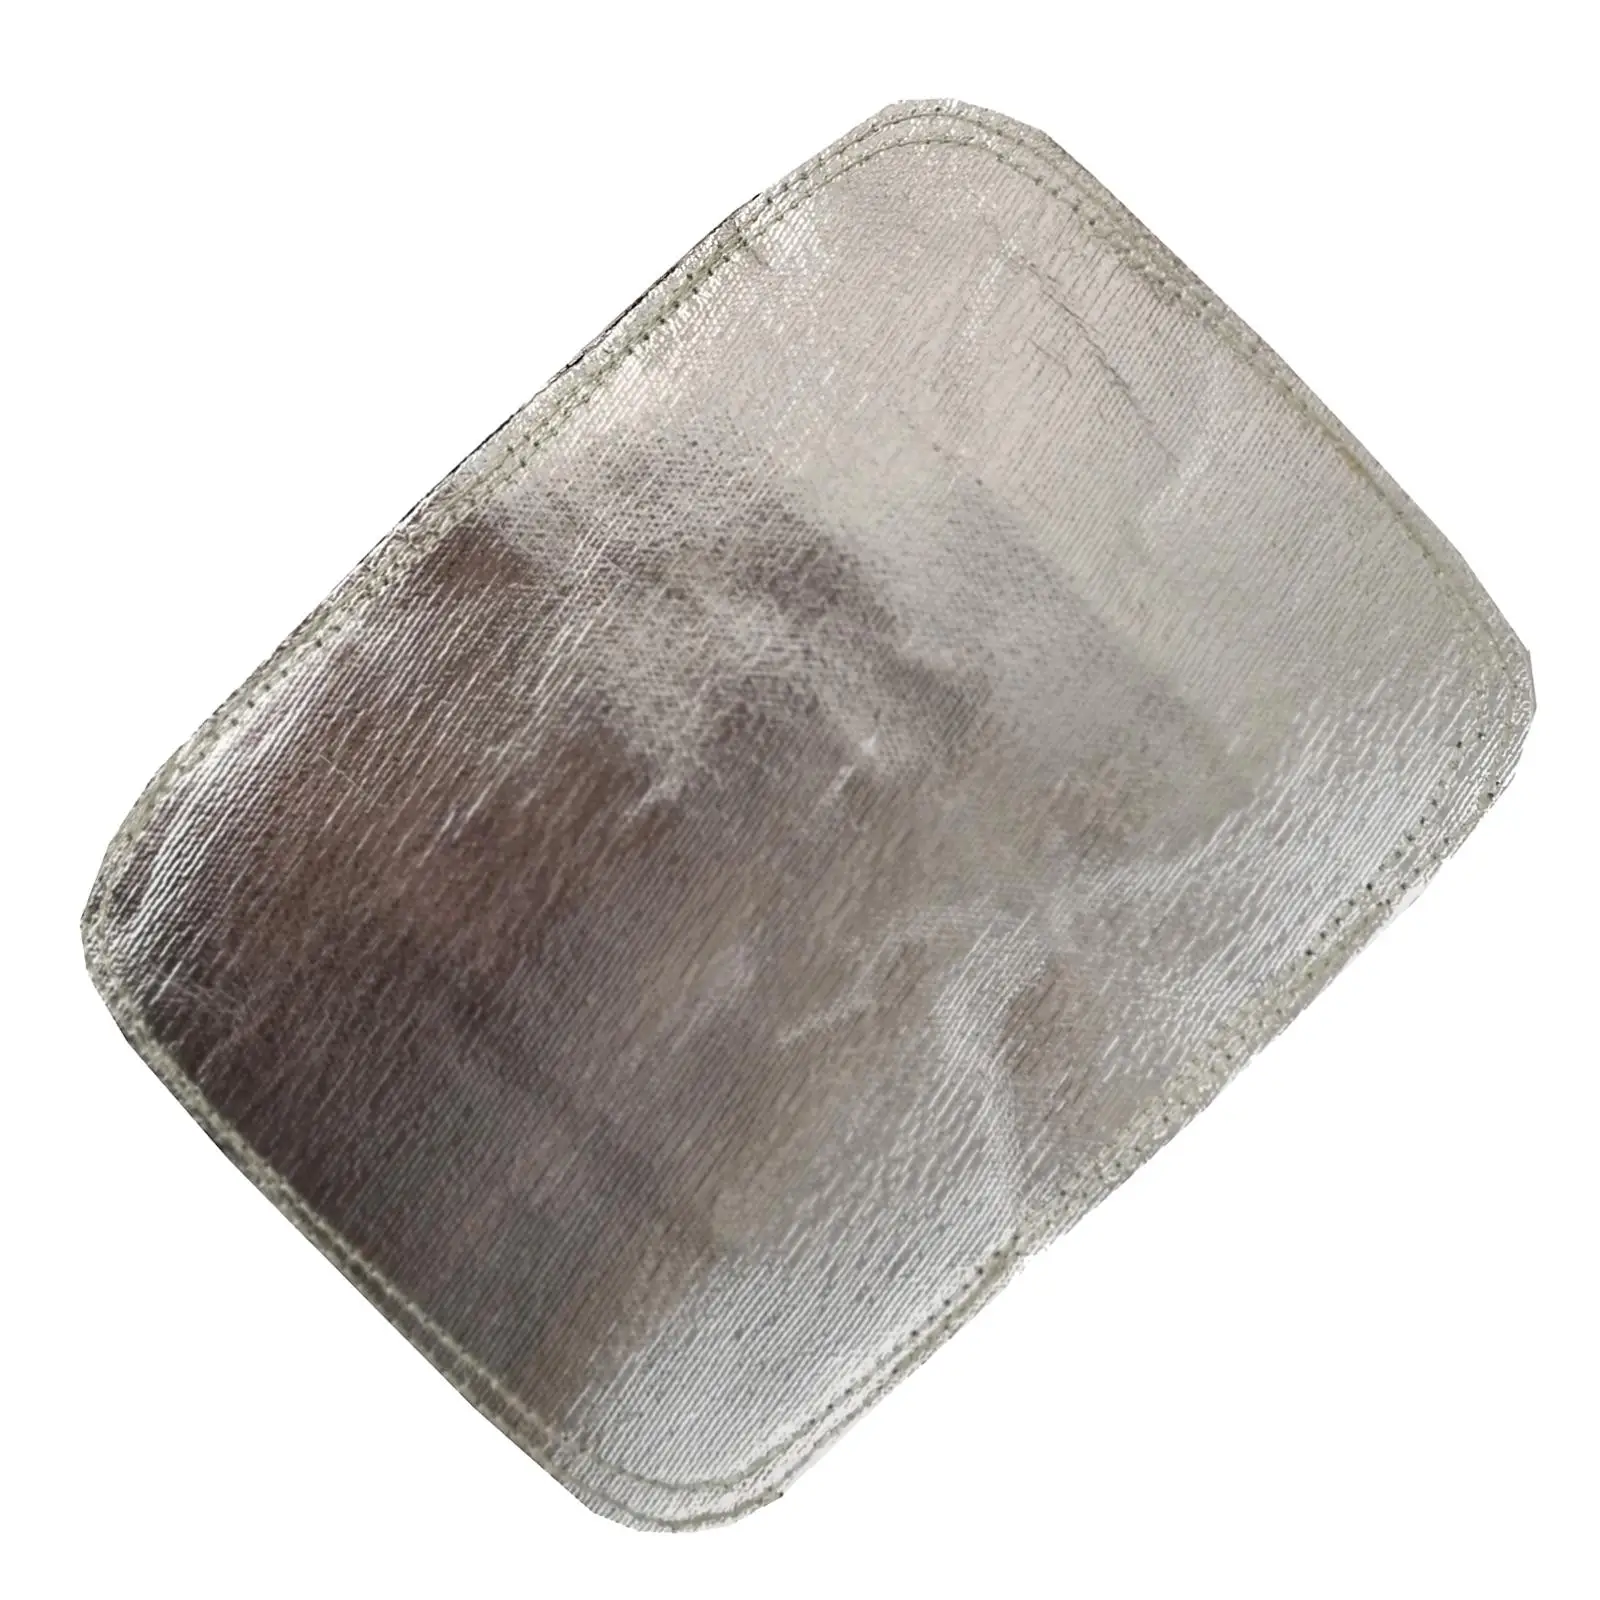 Aluminized Back Hand Pad PU Leather Deflector Welding Heat for Hands for Welder Industrial Cutting Camping Stoves Furnace